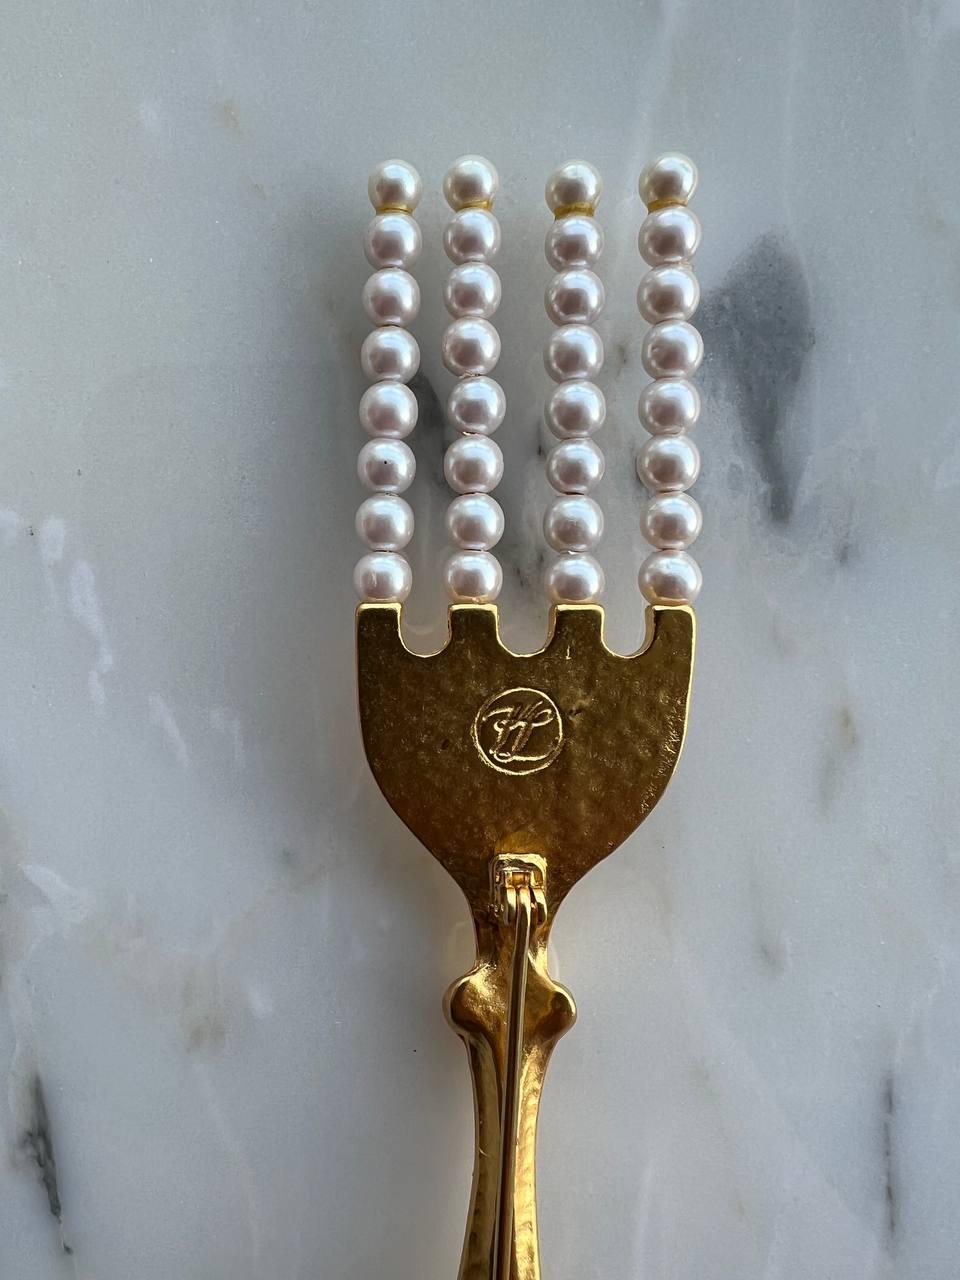 Vintage brooch by Karl Lagerfeld features fork with tines made of faux pearls 24k gold plate. 

Signed. KL monograms. 

Period: 1990s

Condition: very good 

Length – 5.25” /13 cm

........Additional information ........

- Photo might be slightly